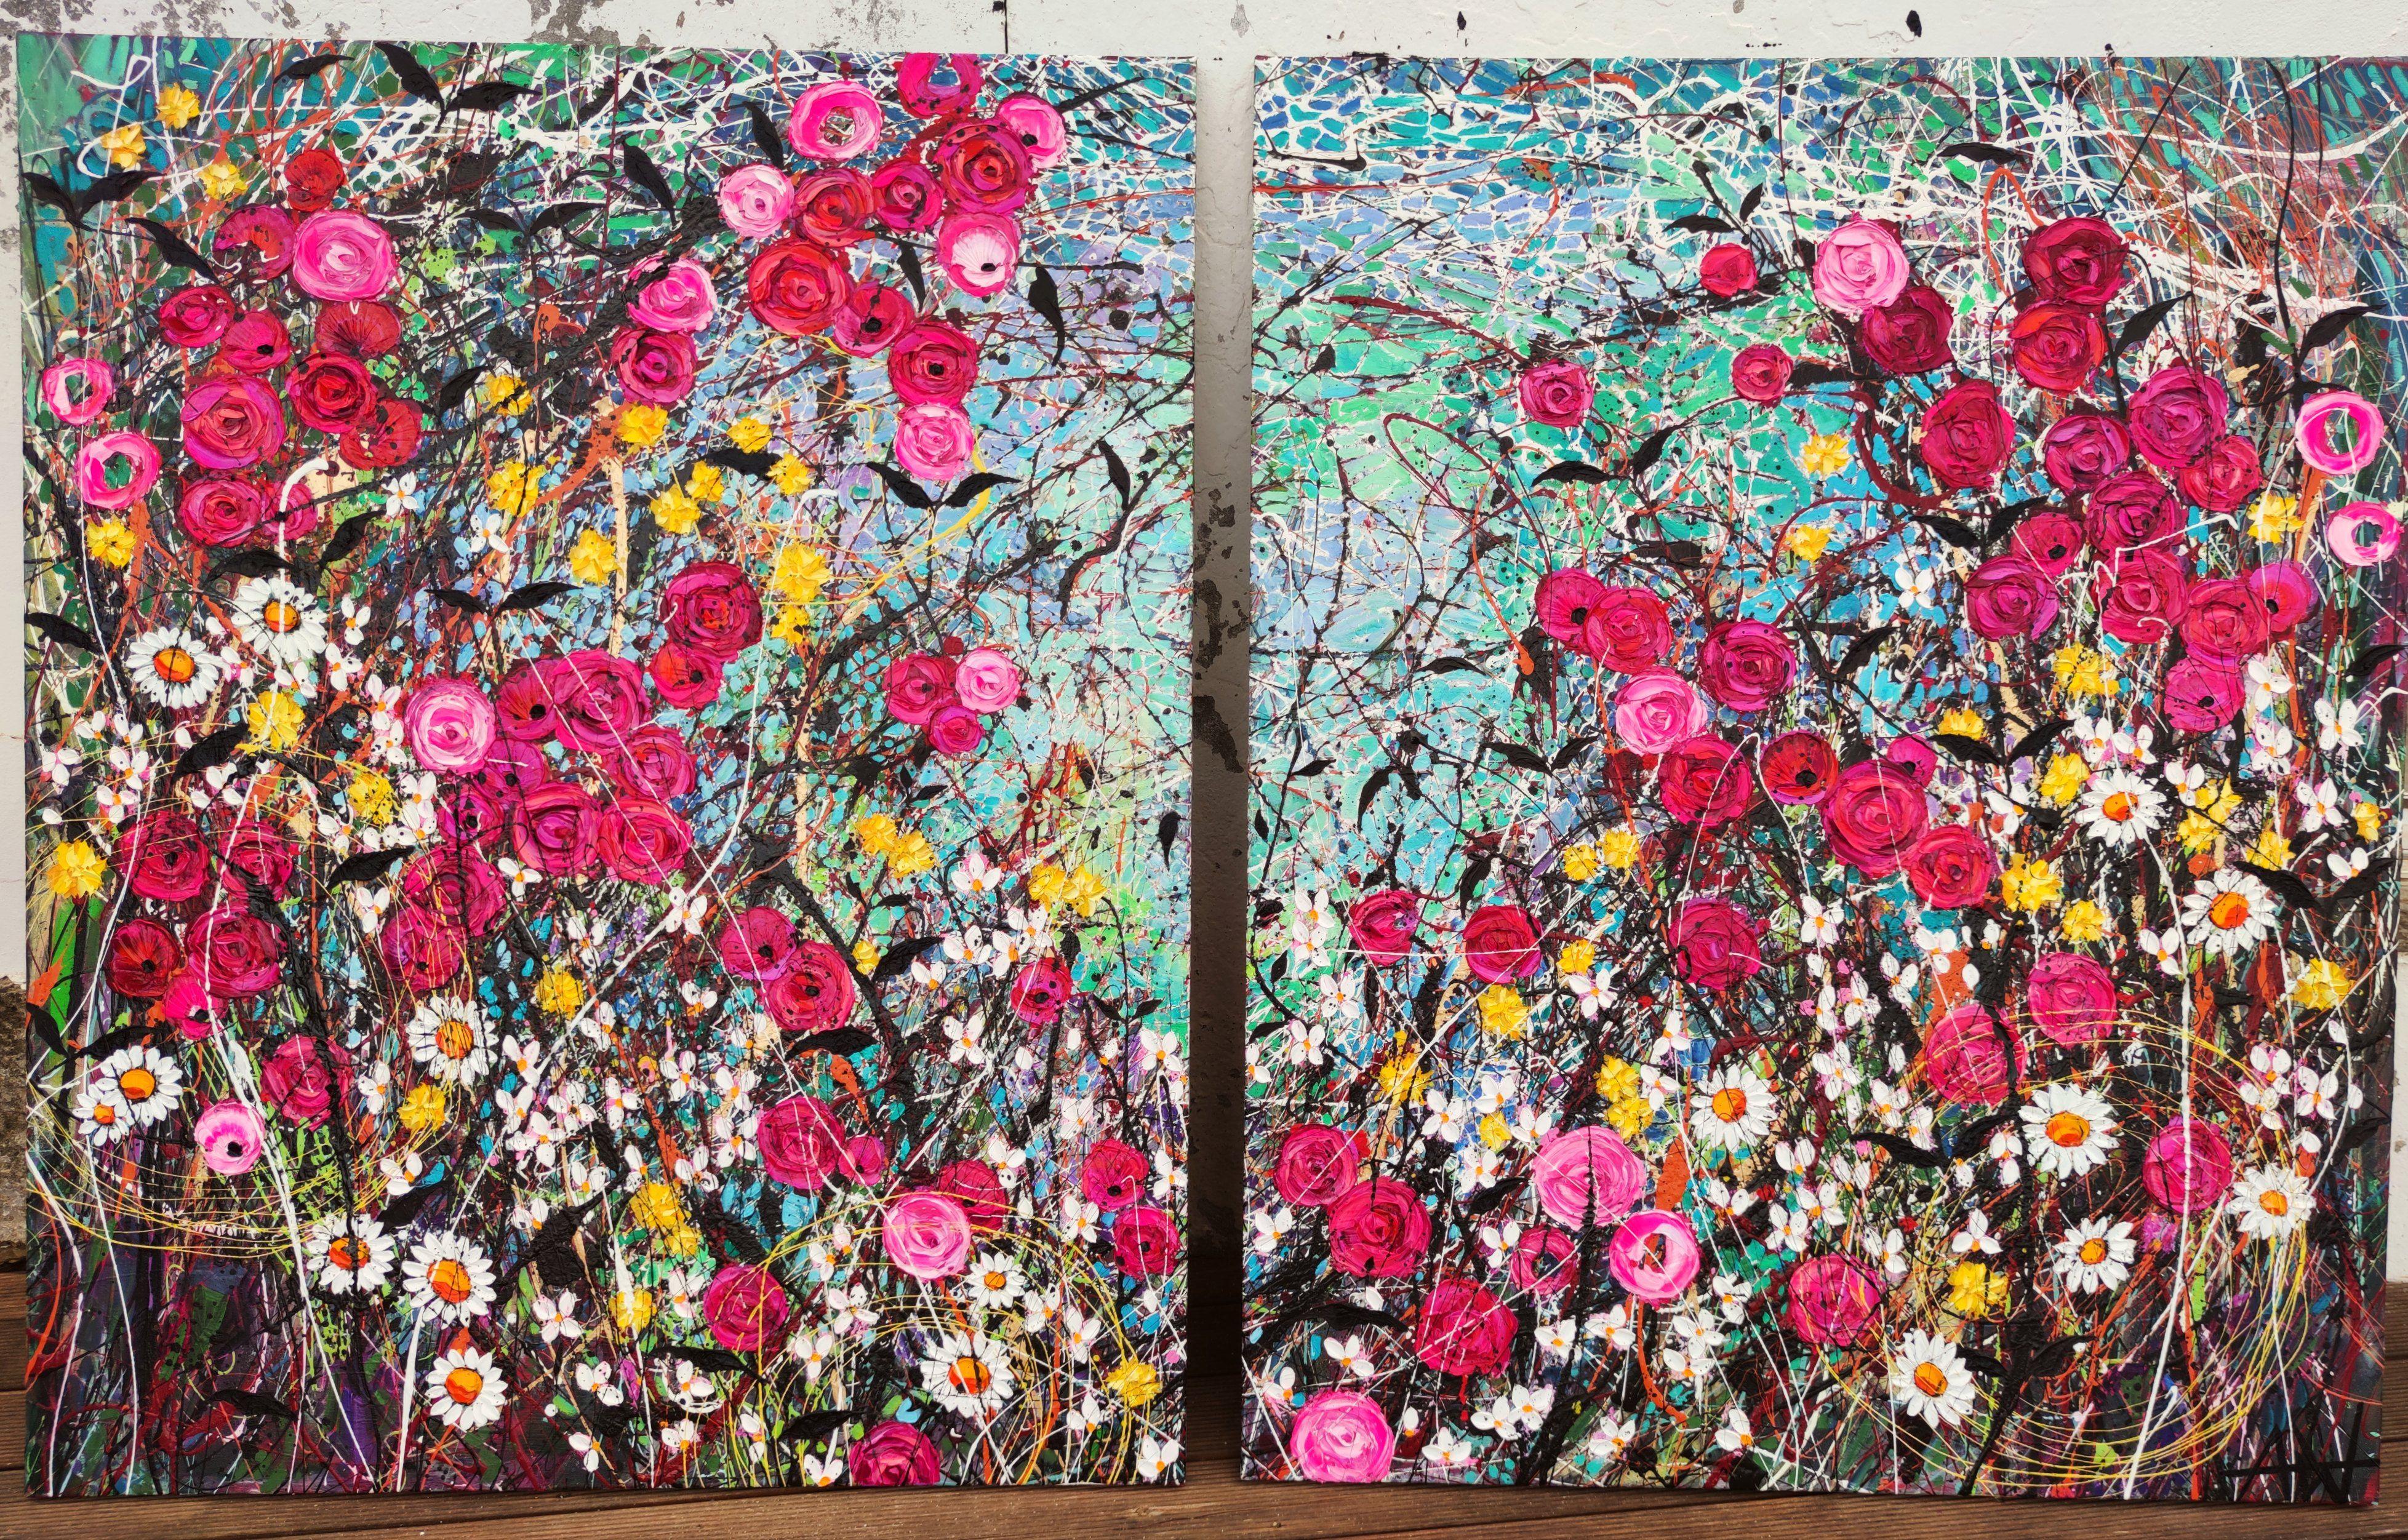 Eglantine, oil and enamel on canvas 160 x 100 x 2 cm on two canvases (Diptych) each measuring 80 x 100 x 2 cm  Eglantine â€¦twisted crooked rose bush, a forgotten patch of garden, flowers bloom, life grows, natureâ€™s defiance. Eglantine  My